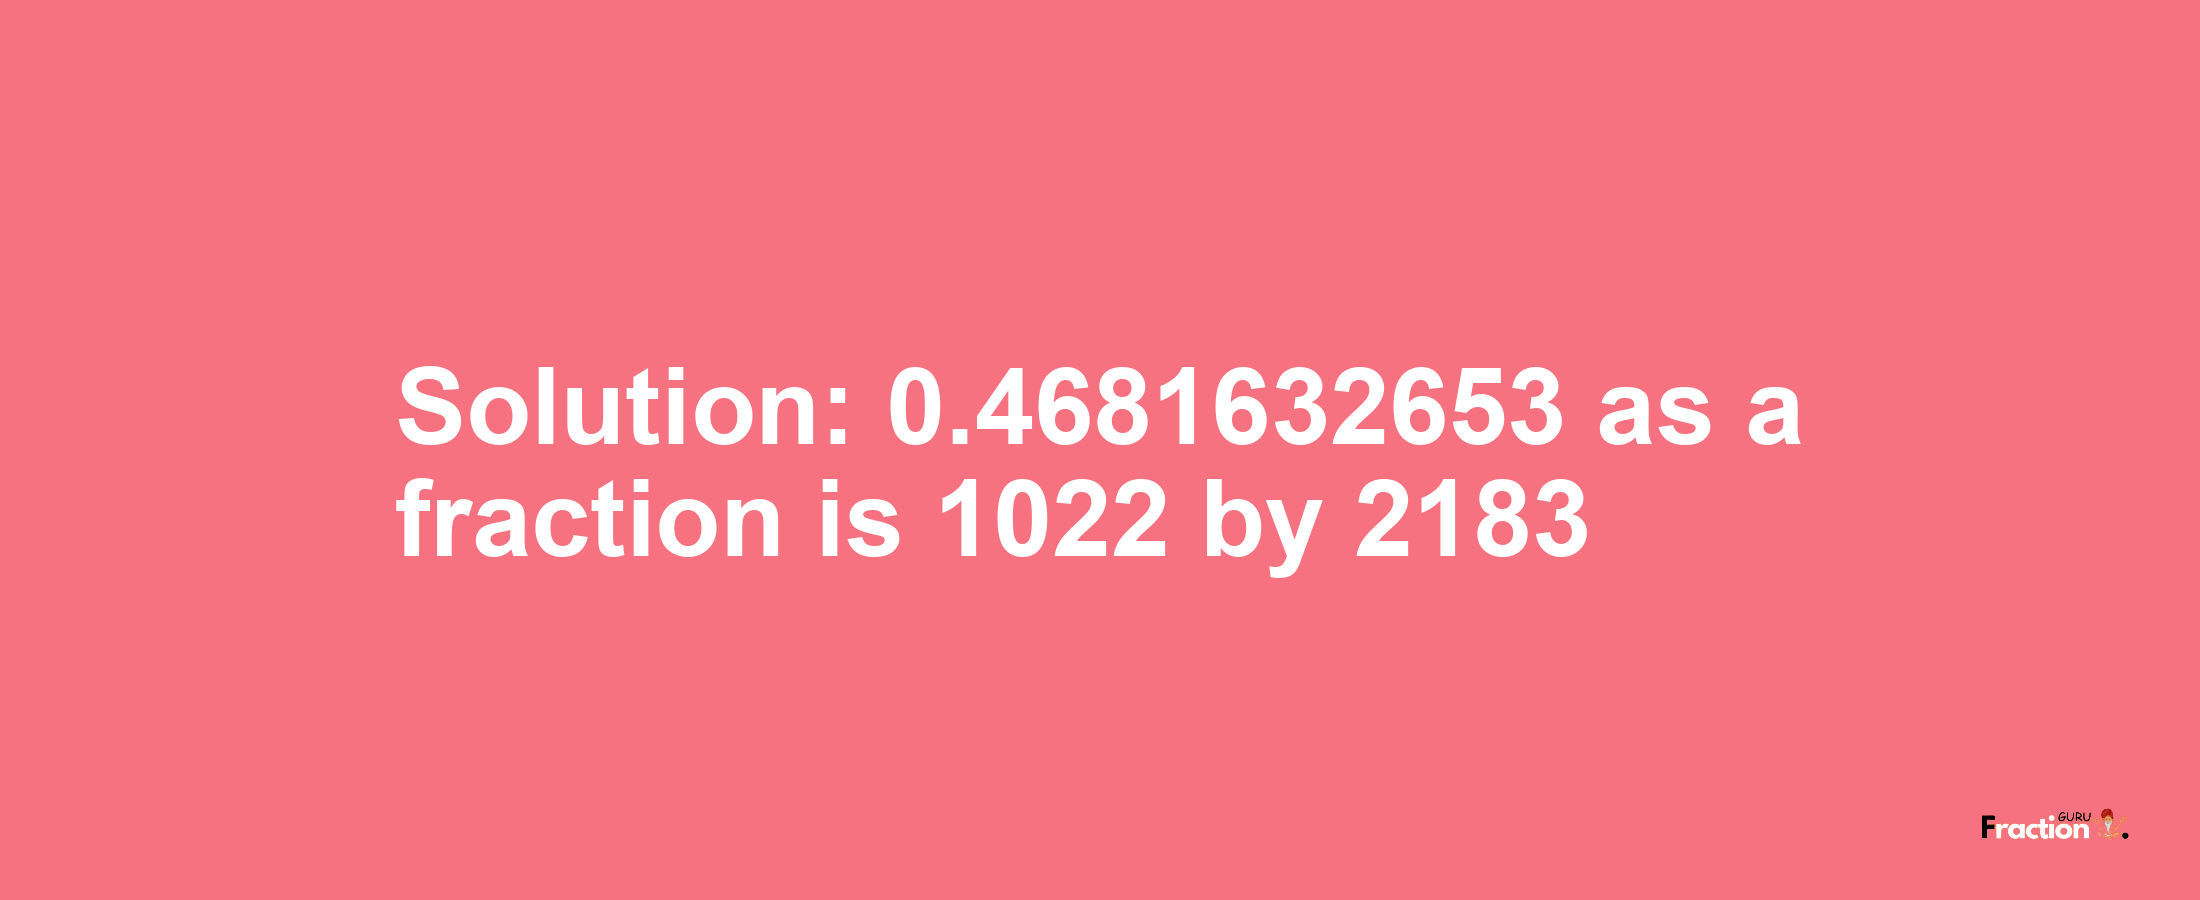 Solution:0.4681632653 as a fraction is 1022/2183